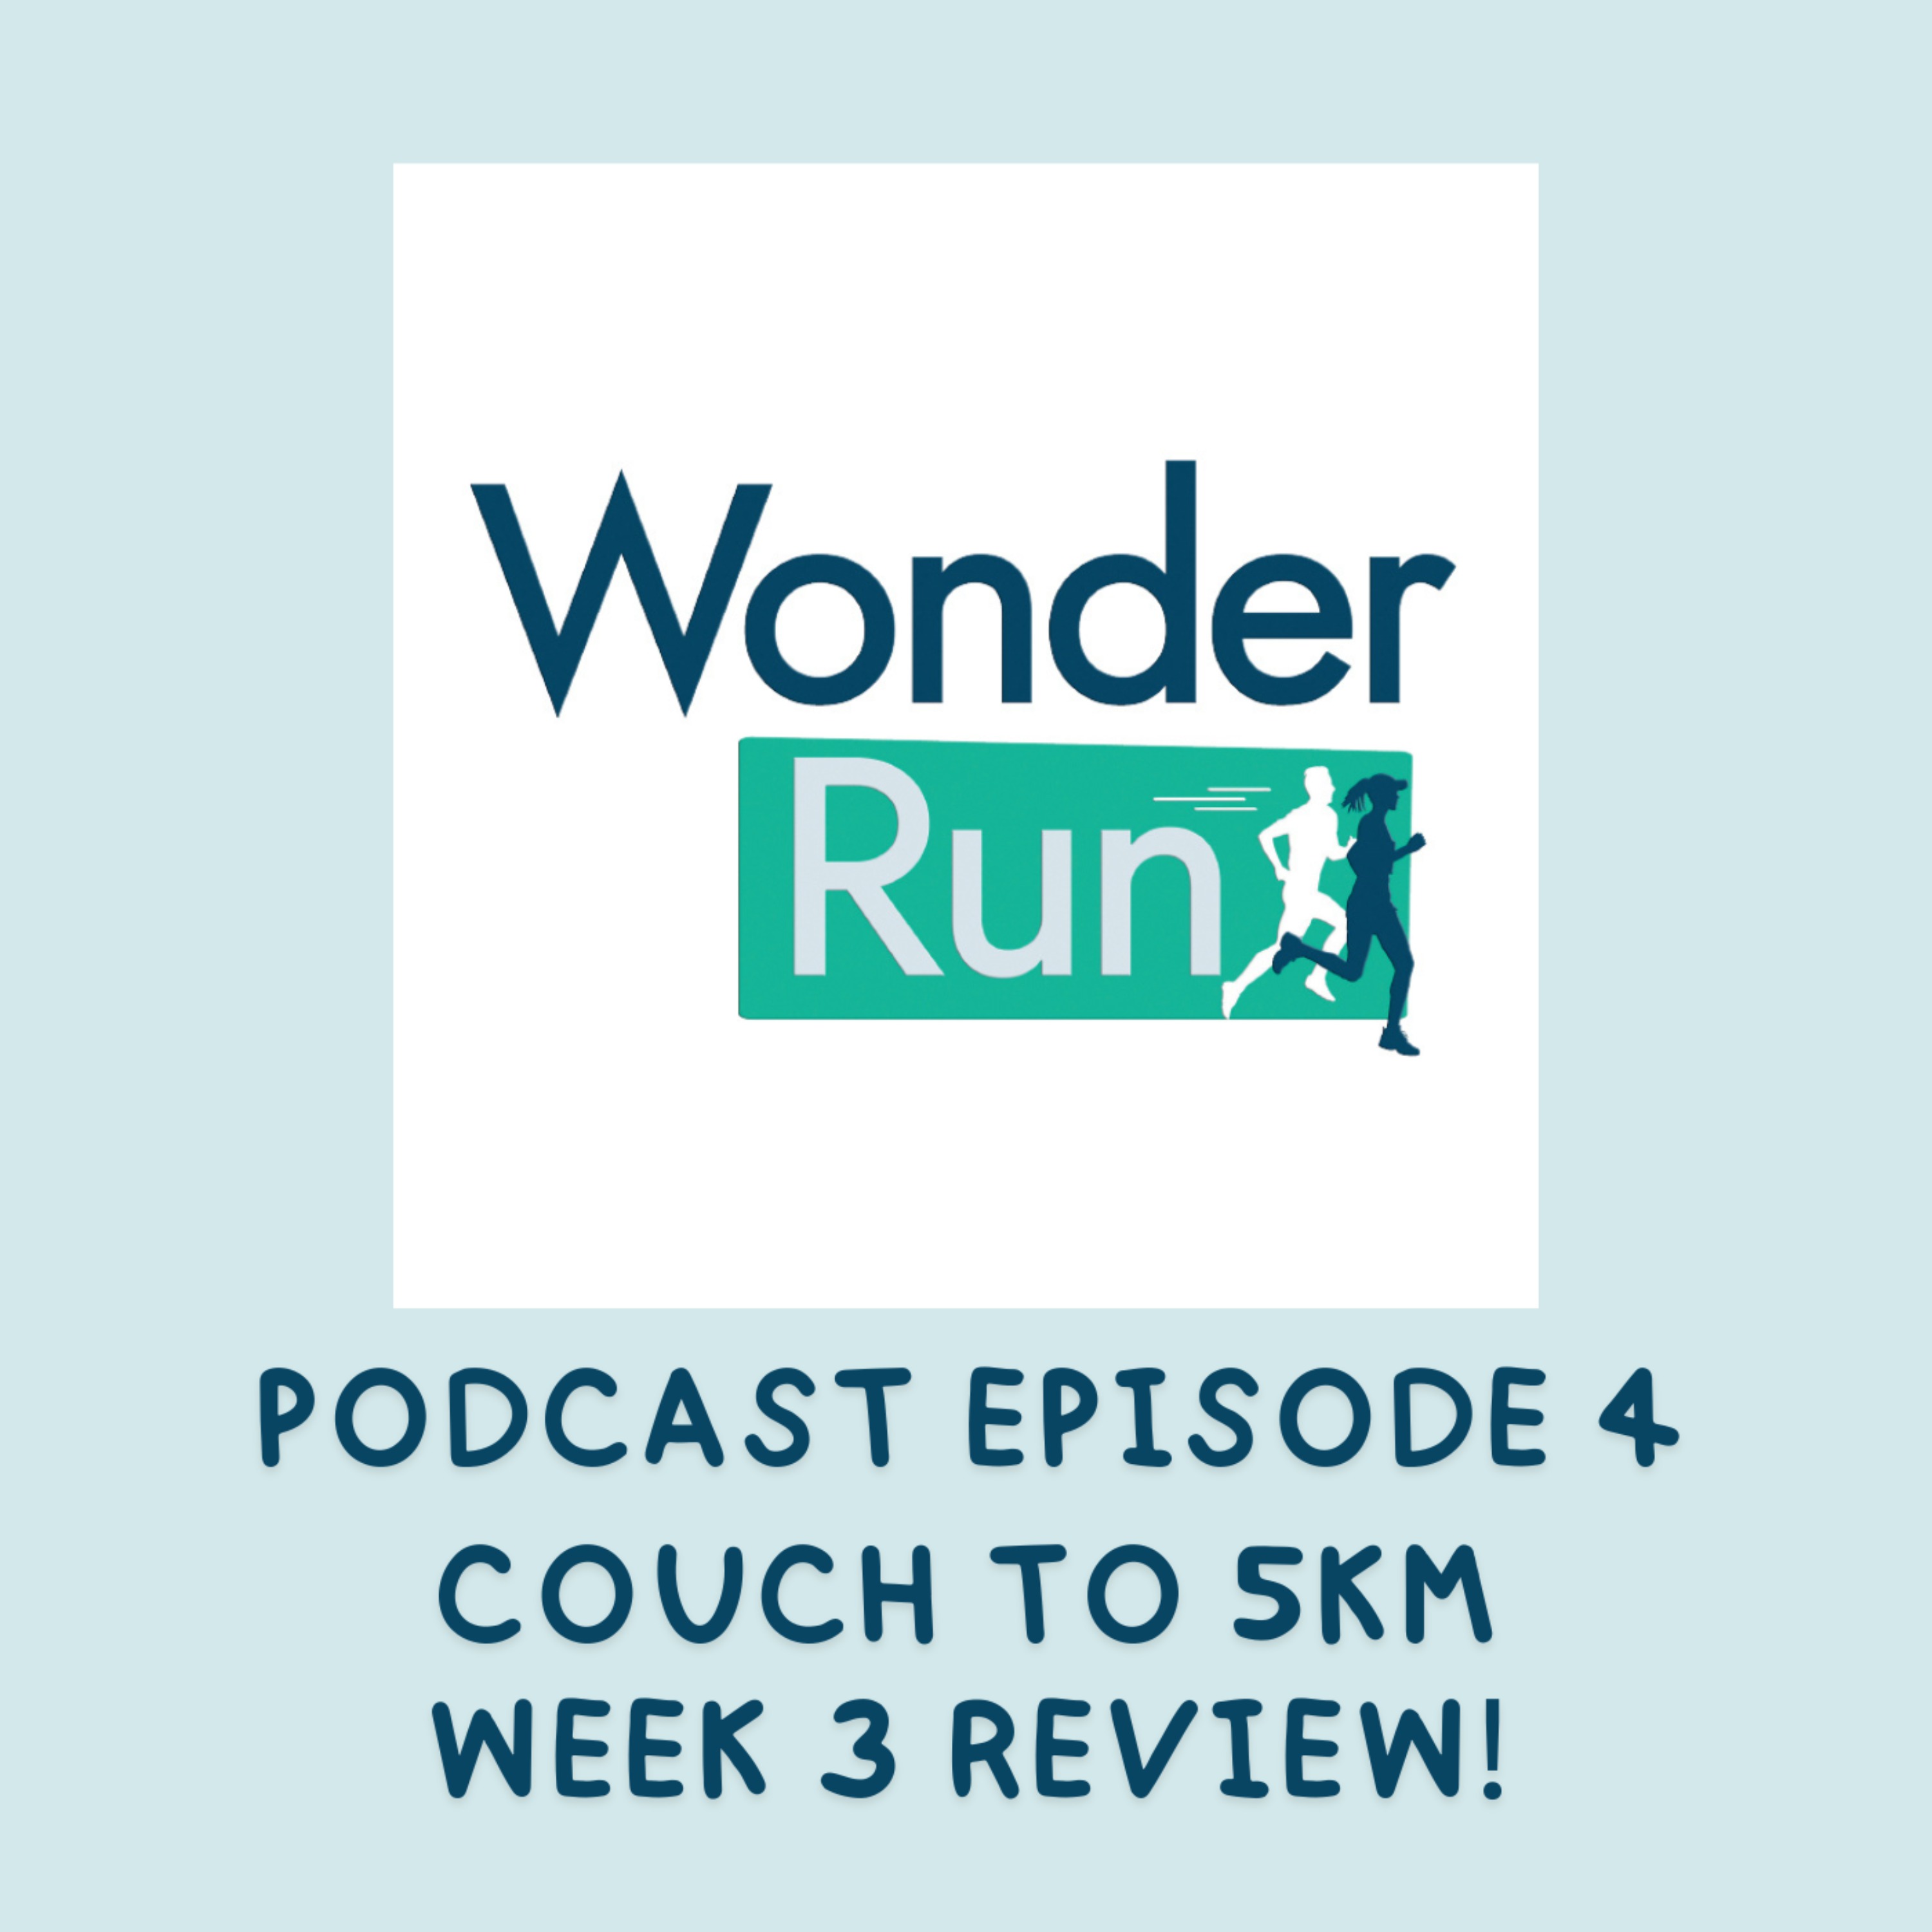 Couch to 5km - Week 3 Review!